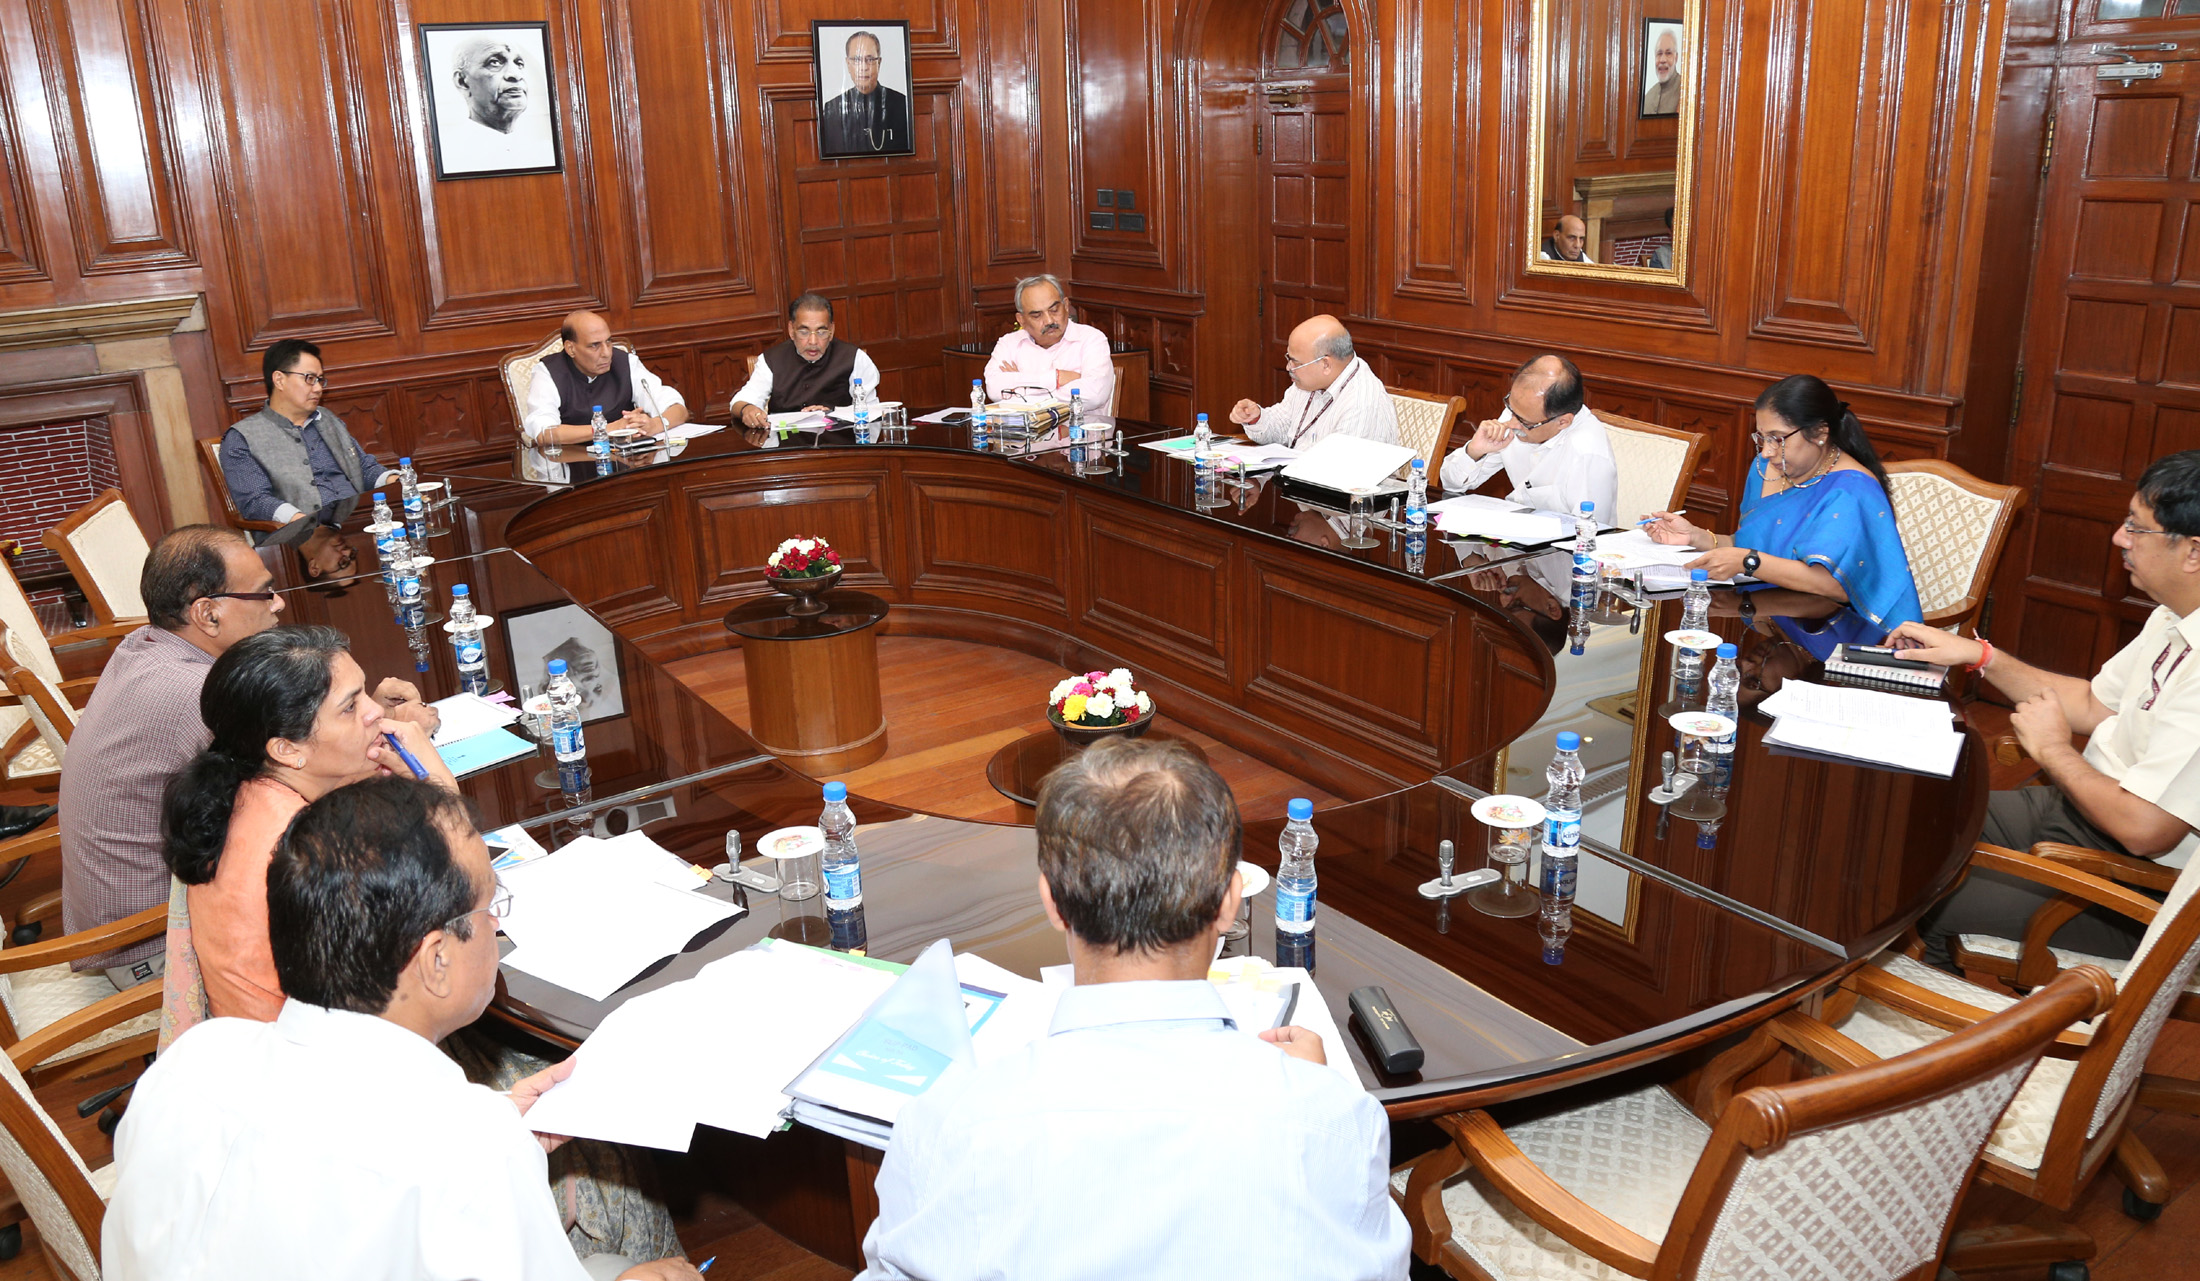 The Union Home Minister, Shri Rajnath Singh chairing a meeting of the High Level Committee for Central Assistance to drought affected Maharashtra, in New Delhi on September 28, 2016.  The Union Minister for Agriculture and Farmers Welfare, Shri Radha Mohan Singh, the Minister of State for Home Affairs, Shri Kiren Rijiju, the Union Home Secretary, Shri Rajiv Mehrishi and senior officers of the Ministries of Home, Finance and Agriculture are also seen.